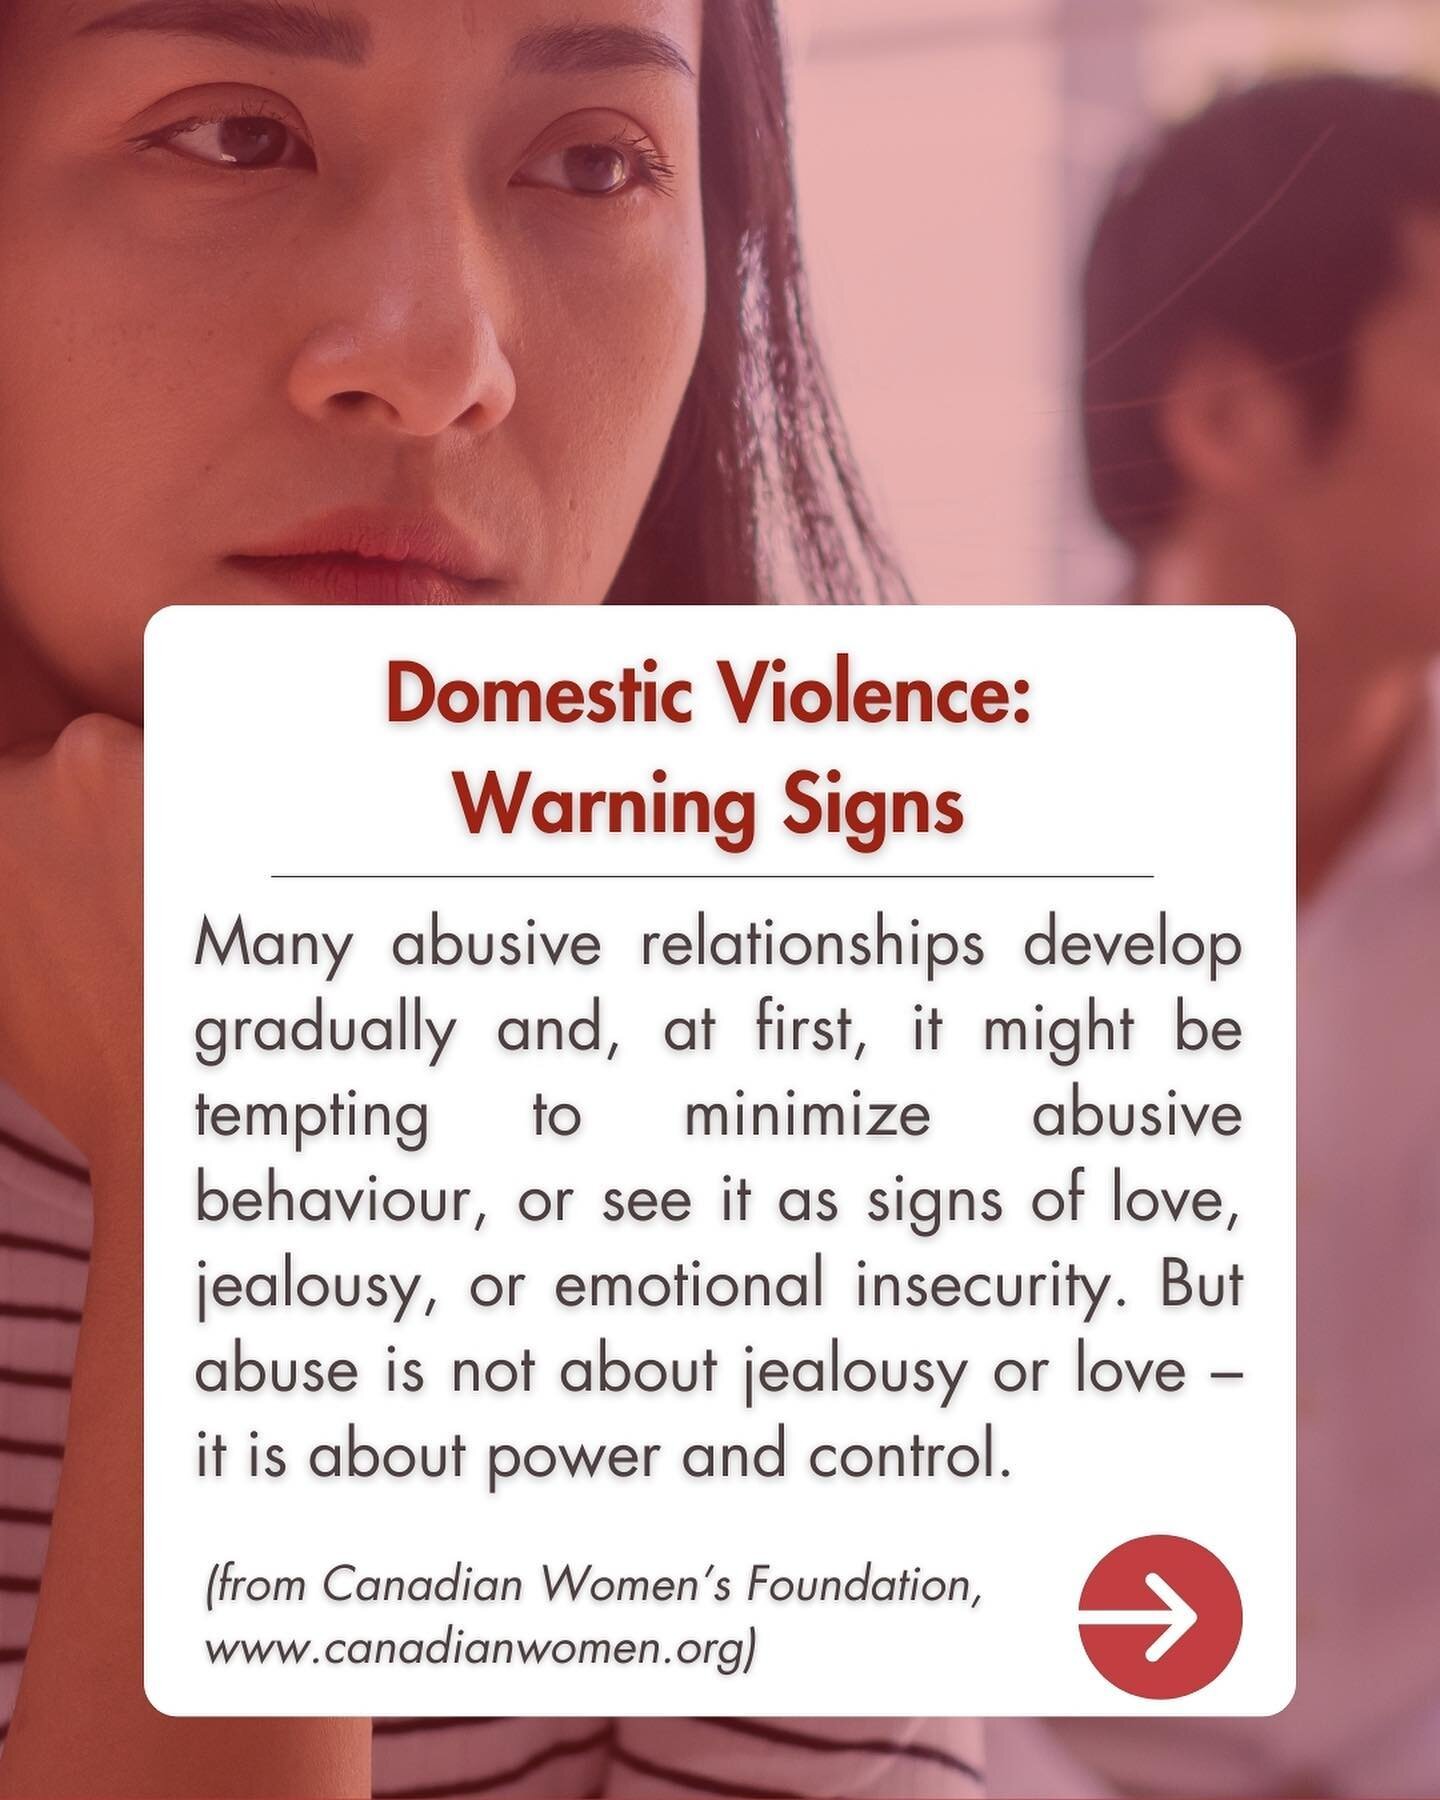 Source:
&ldquo;Warning Signs of an Abusive Relationship&rdquo;, Canadian Women&rsquo;s Foundation Website &mdash; https://canadianwomen.org/blog/warning-signs-abusive-controlling-relationship/
 

If you or someone you know is being abused, there are 